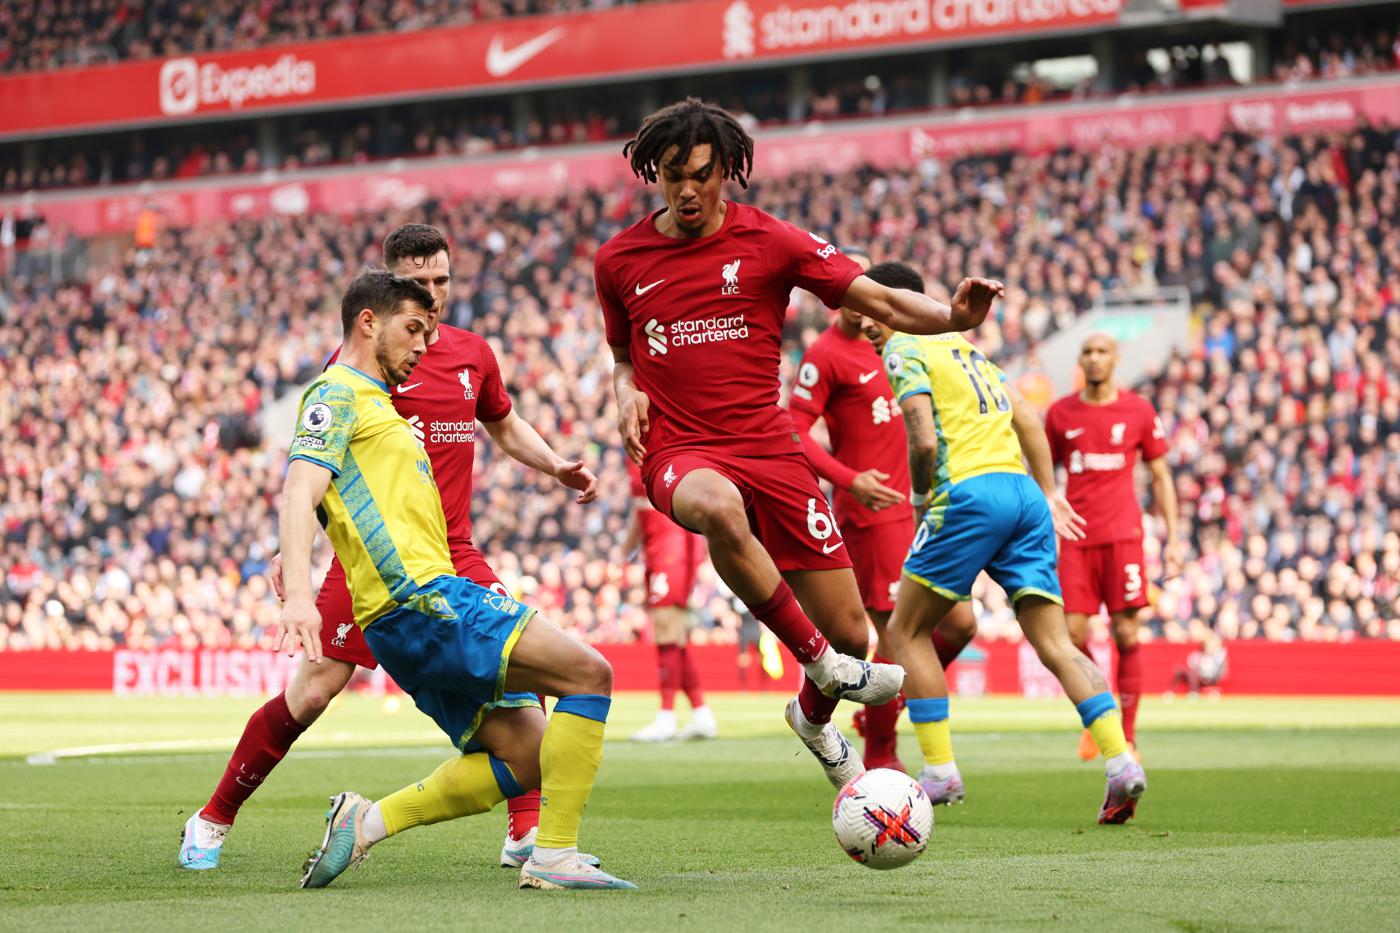 Liverpool v Nottingham Forest - 3-2. English Championship, round of 32. Match review, statistics